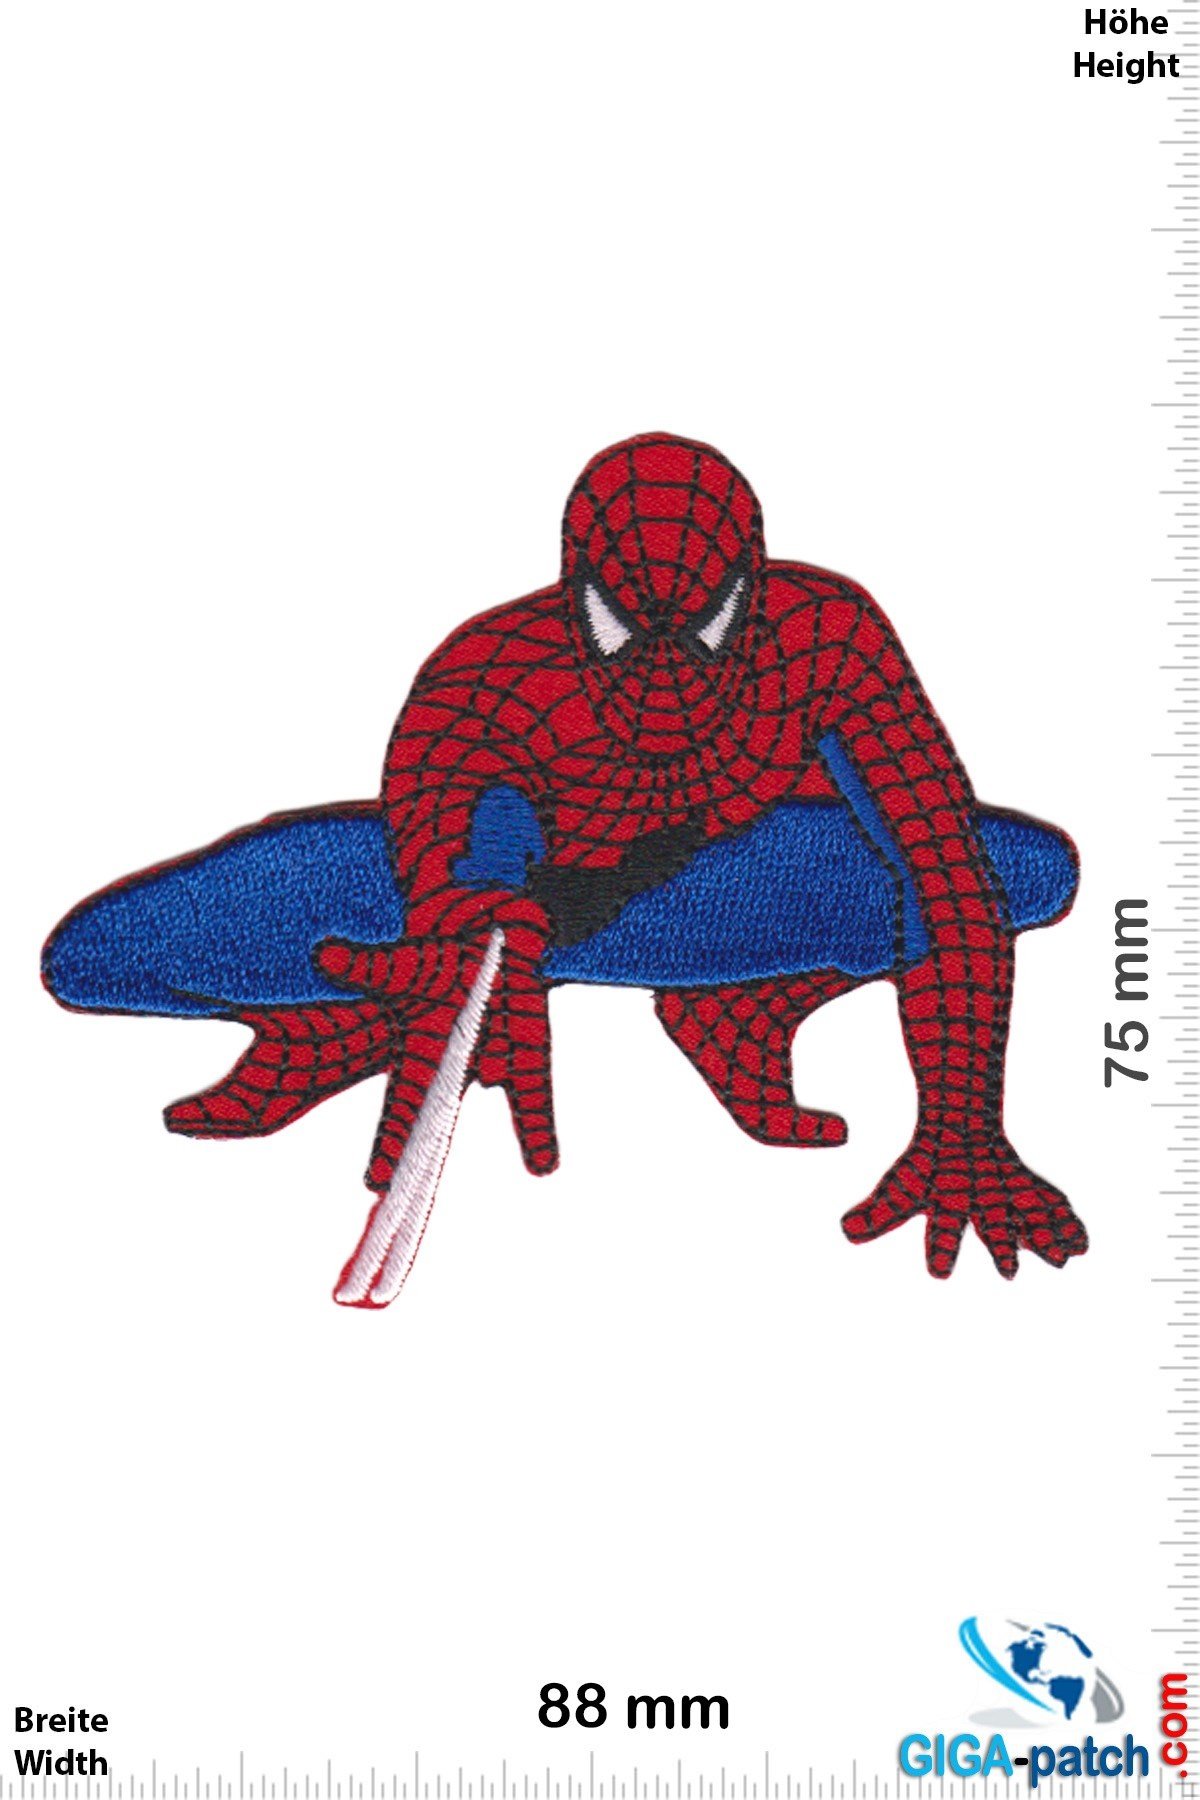 Marvel Spiderman Iron On Patches For Clothing Cartoon Thermal